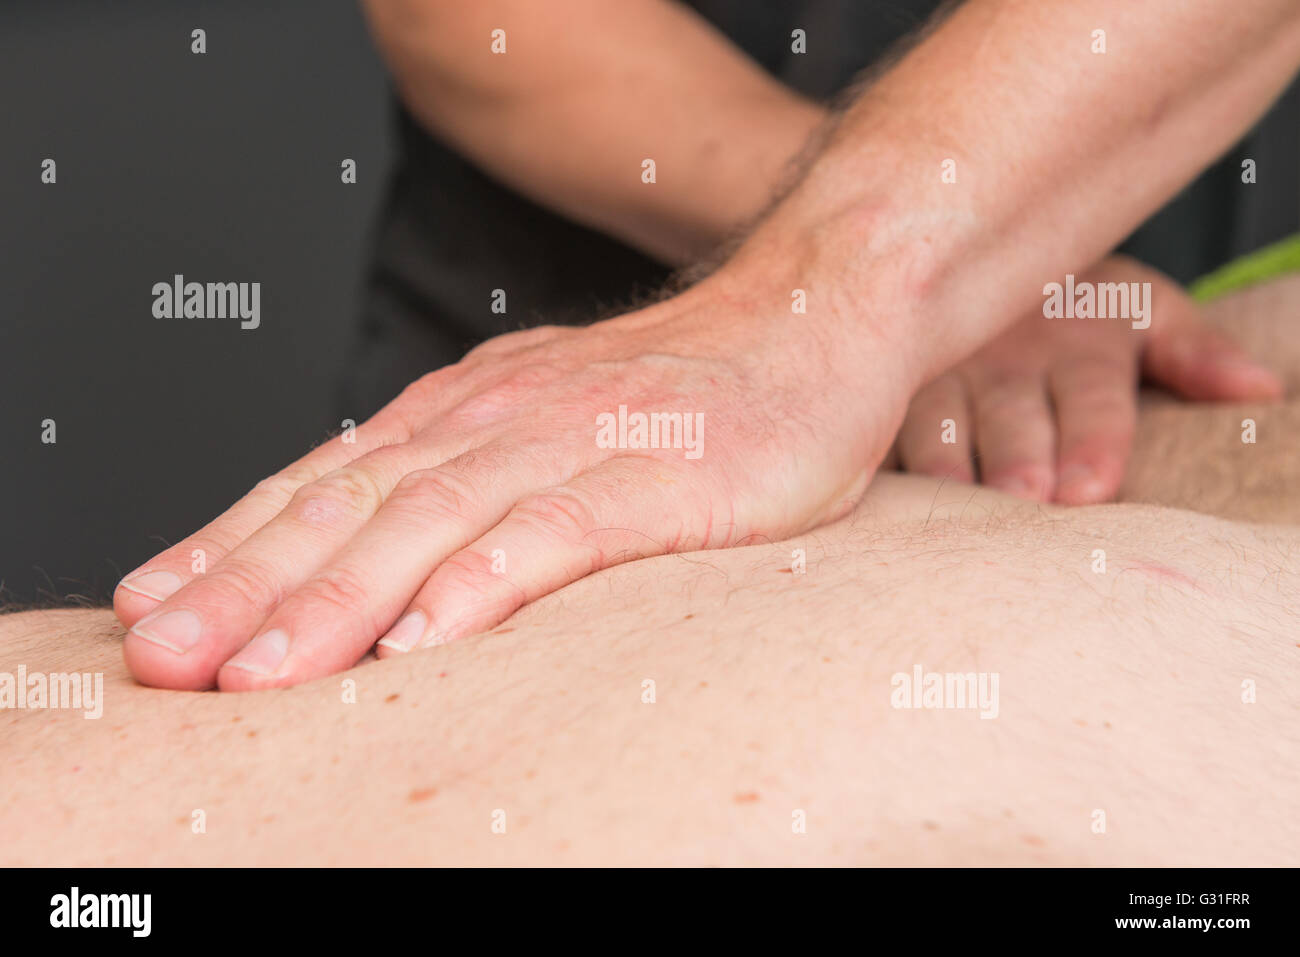 Massage therapist is working with a client Stock Photo